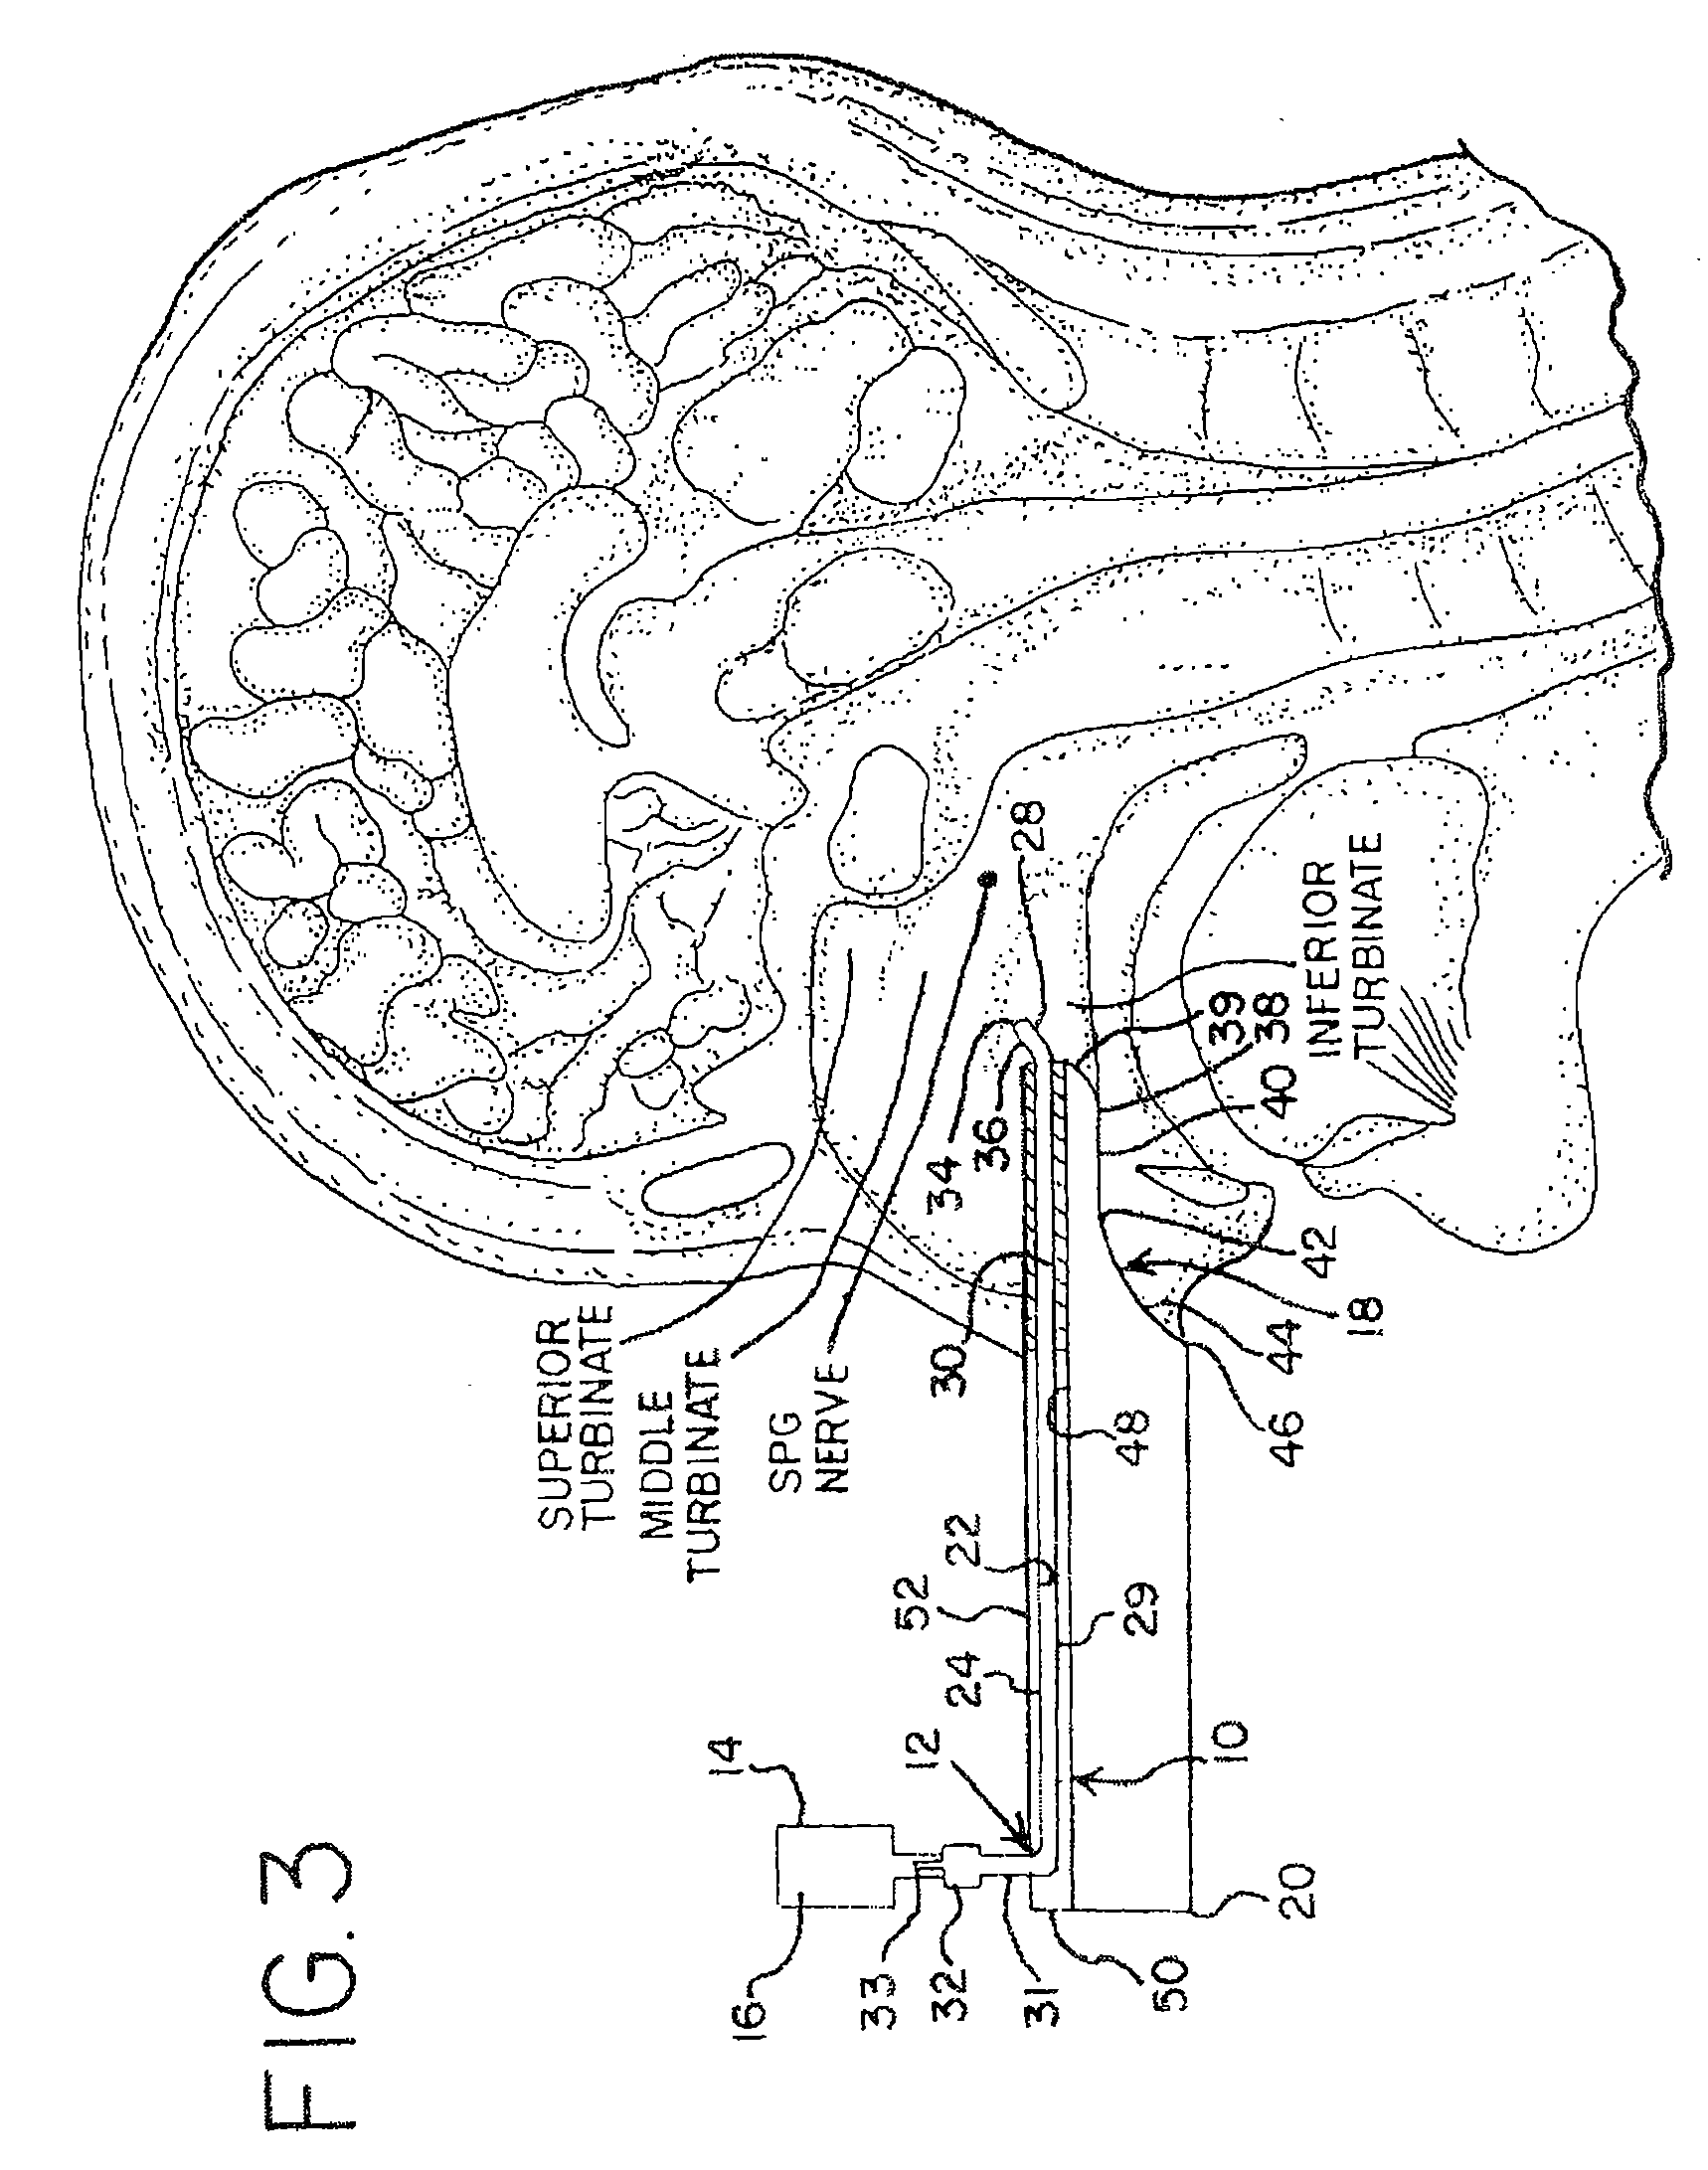 Methods for Ameliorating Pain and Devices for Delivering a Medicament